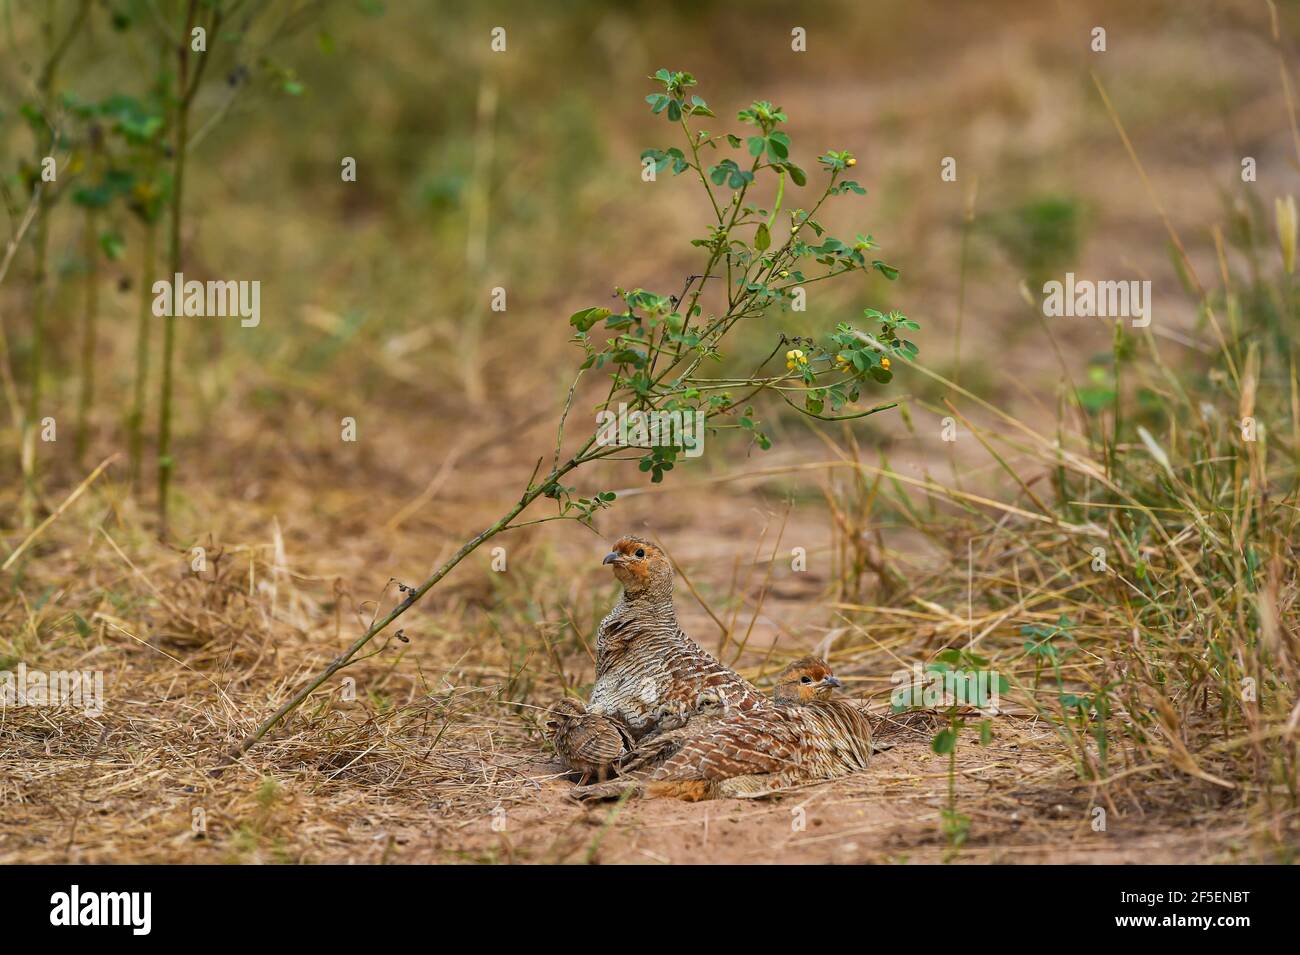 grey francolin or grey partridge or Francolinus pondicerianus family in natural monsoon green background at Ranthambore national park or tiger reserve Stock Photo